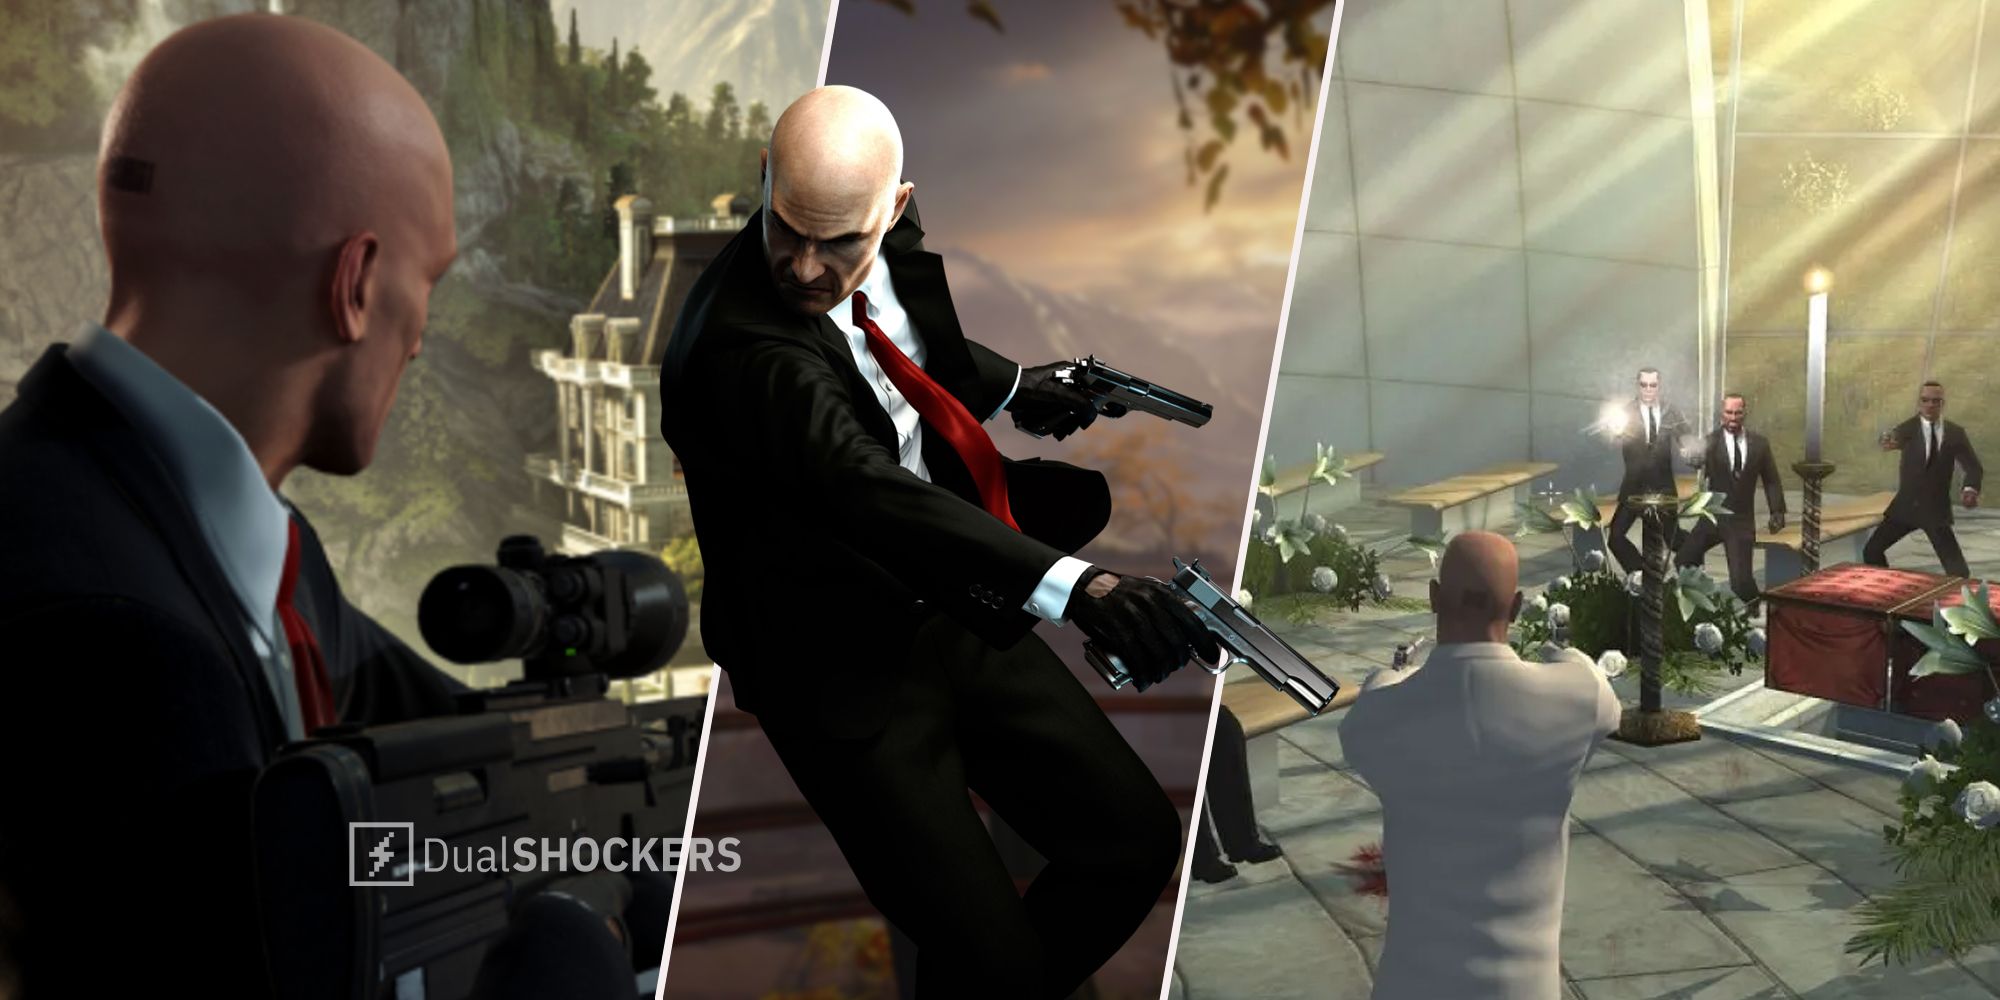 Hitman games Agent 47 and gameplay